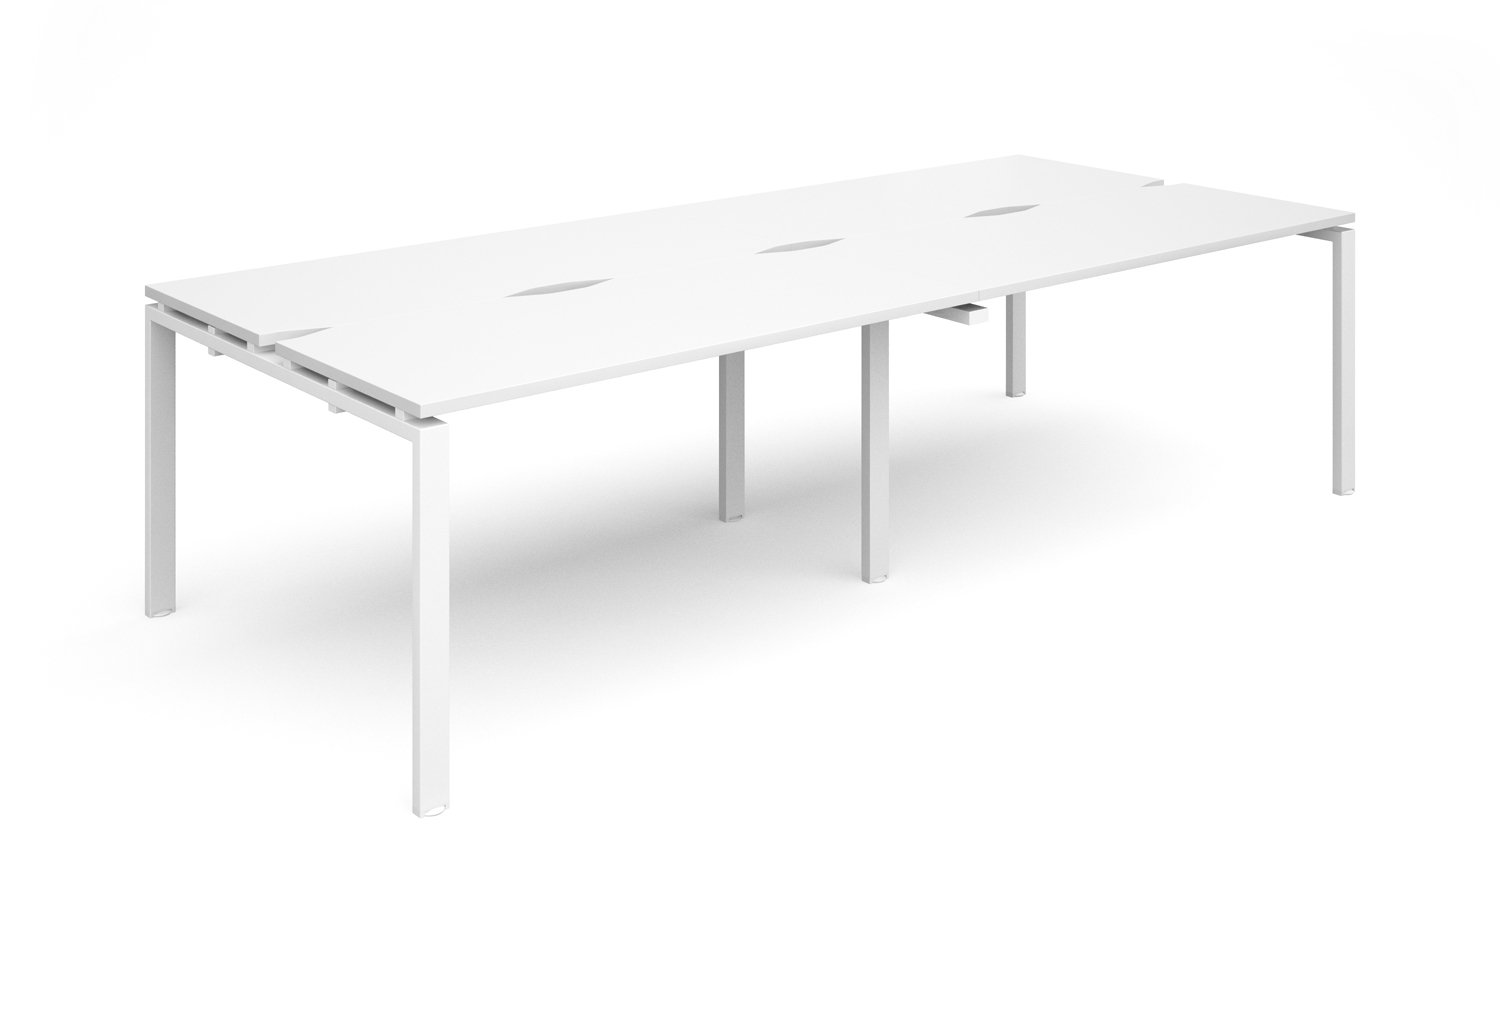 Prime Back To Back Double Narrow Bench Office Desk (White Legs), 280wx120dx73h (cm), White, Express Delivery